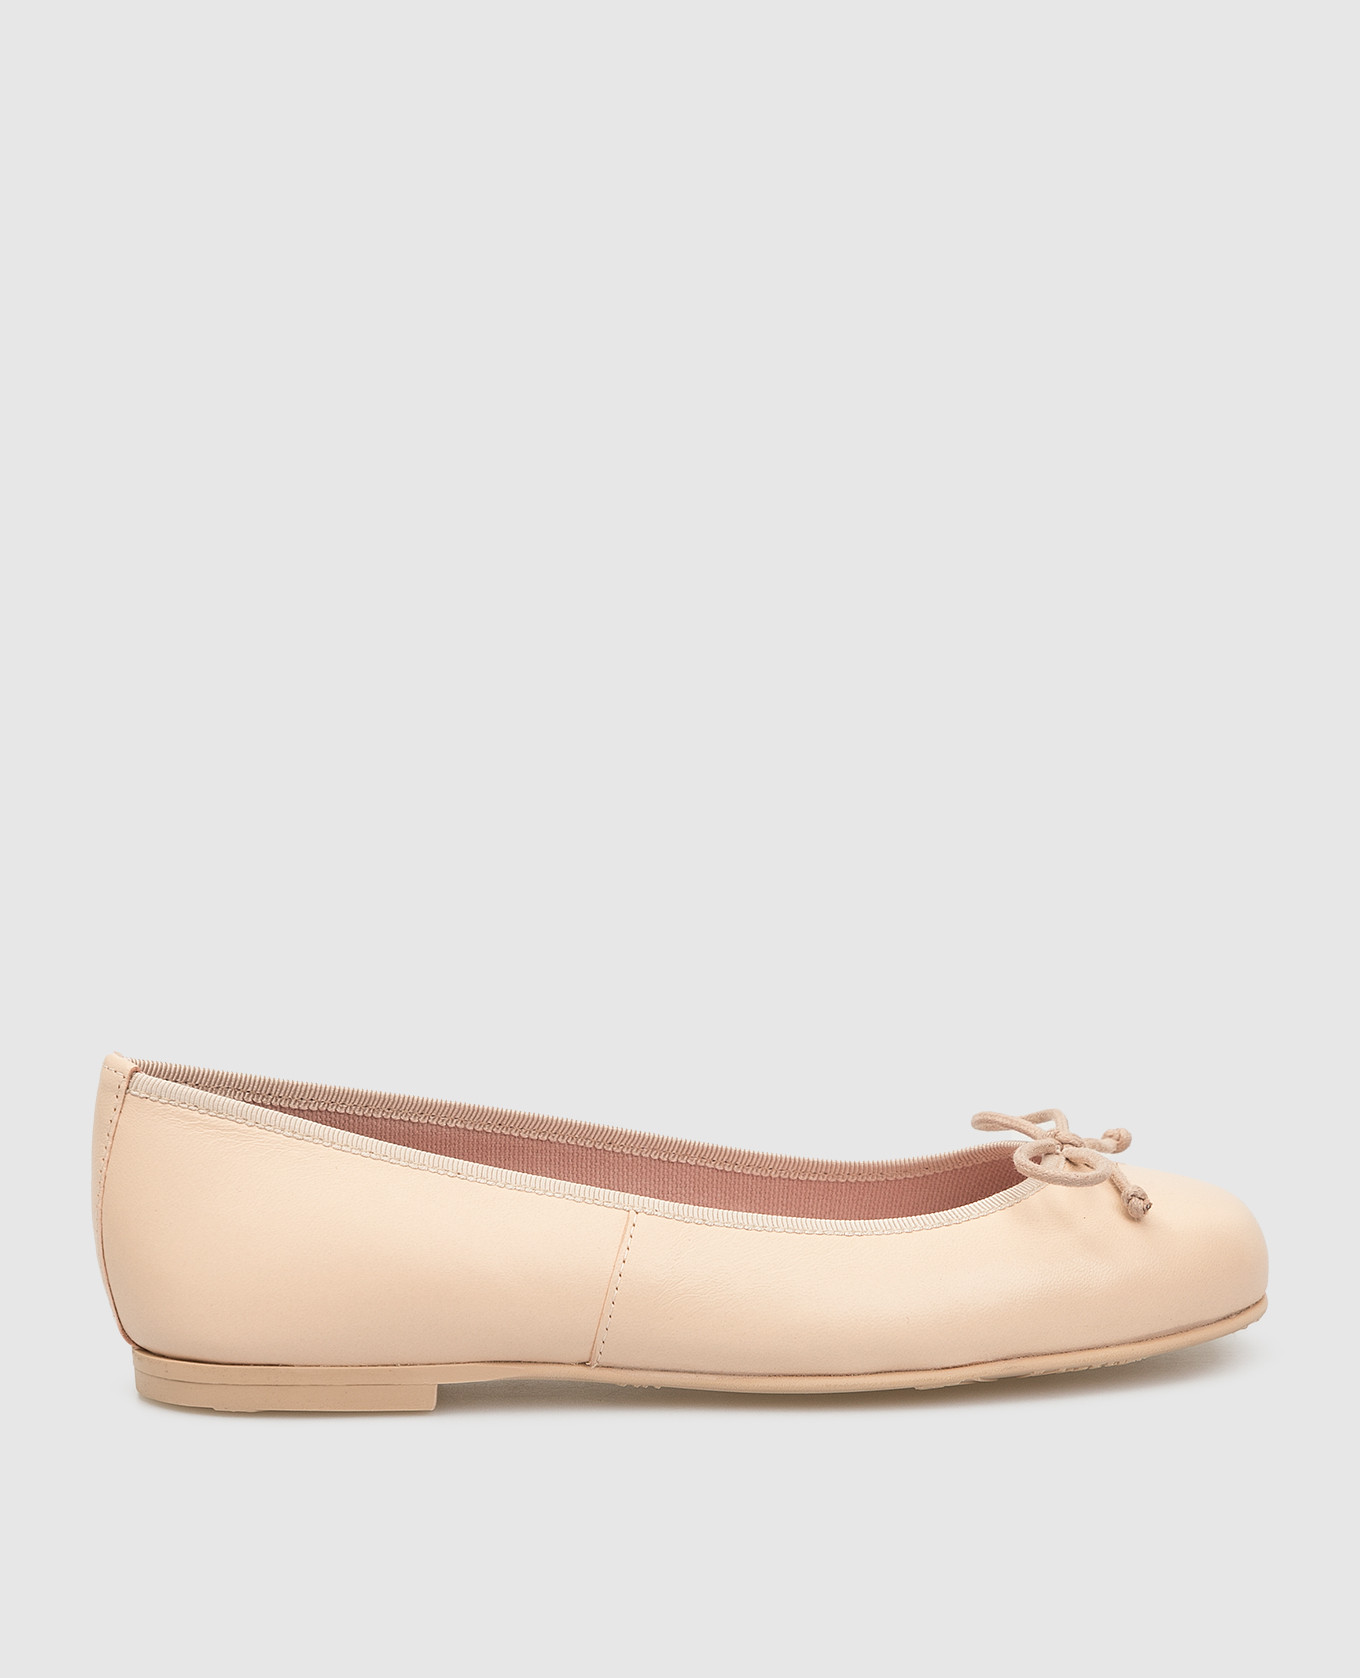 Hermione children's leather beige ballet flats with a bow